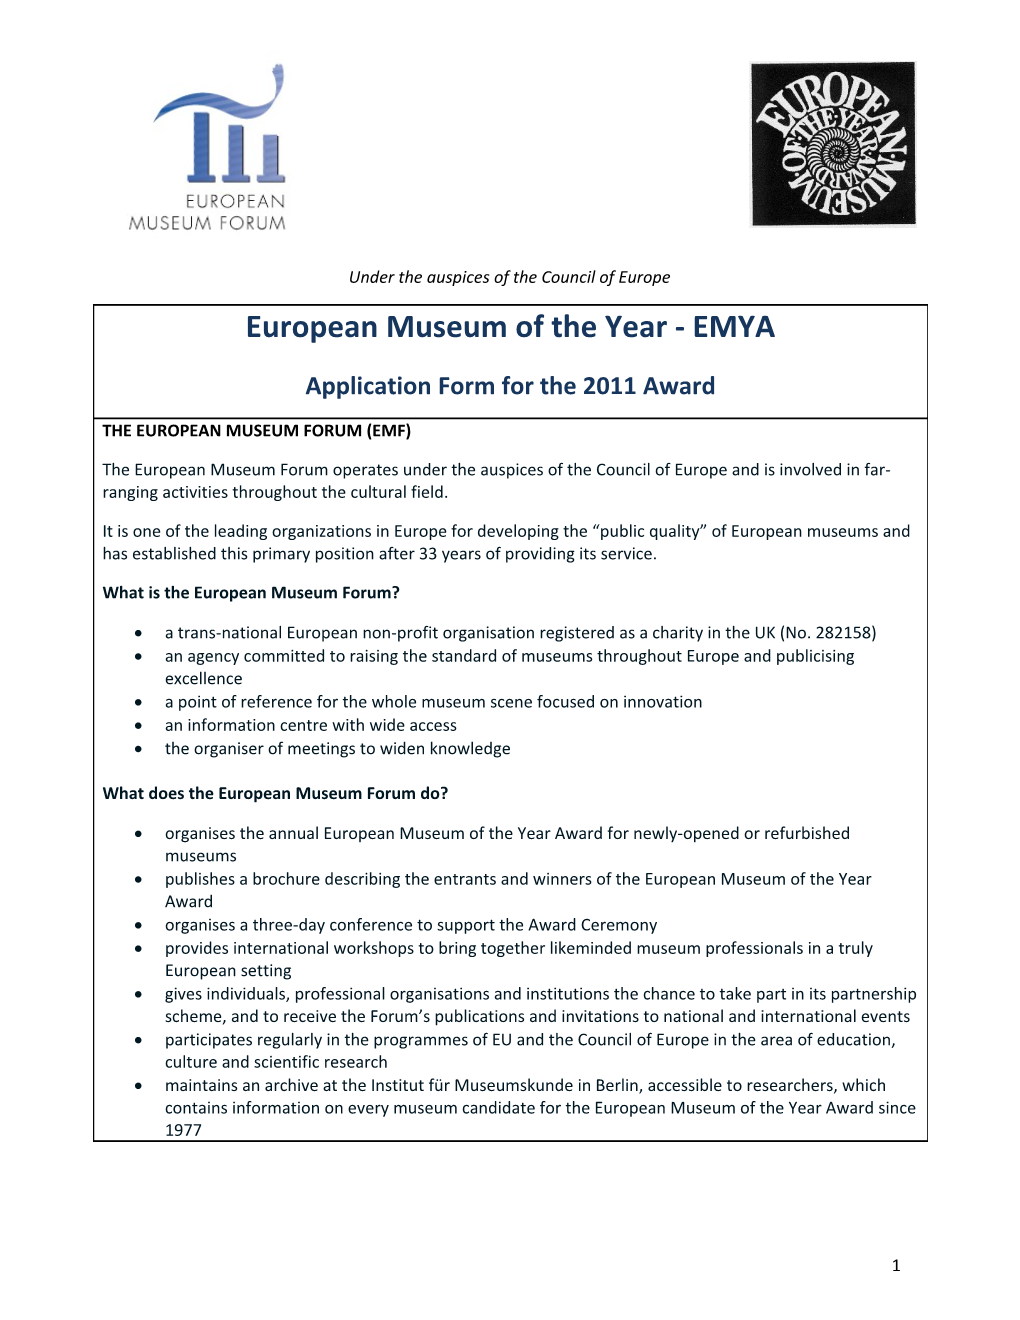 European Museum of the Year Award EMYA Under the Auspices of the Council of Europe